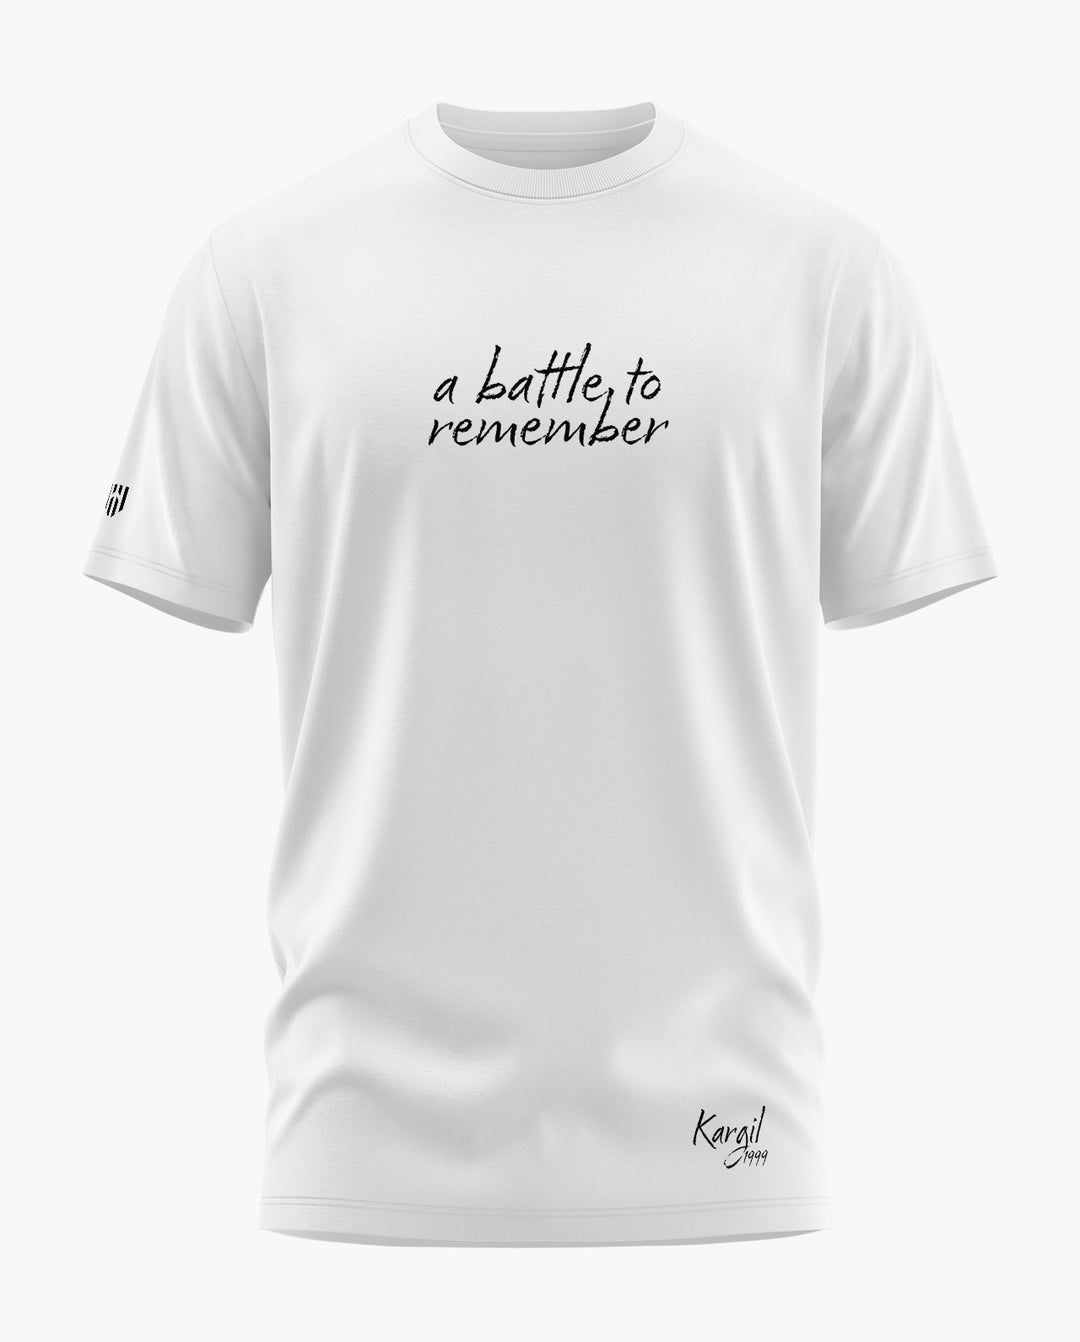 A BATTLE TO REMEMBER T-Shirt